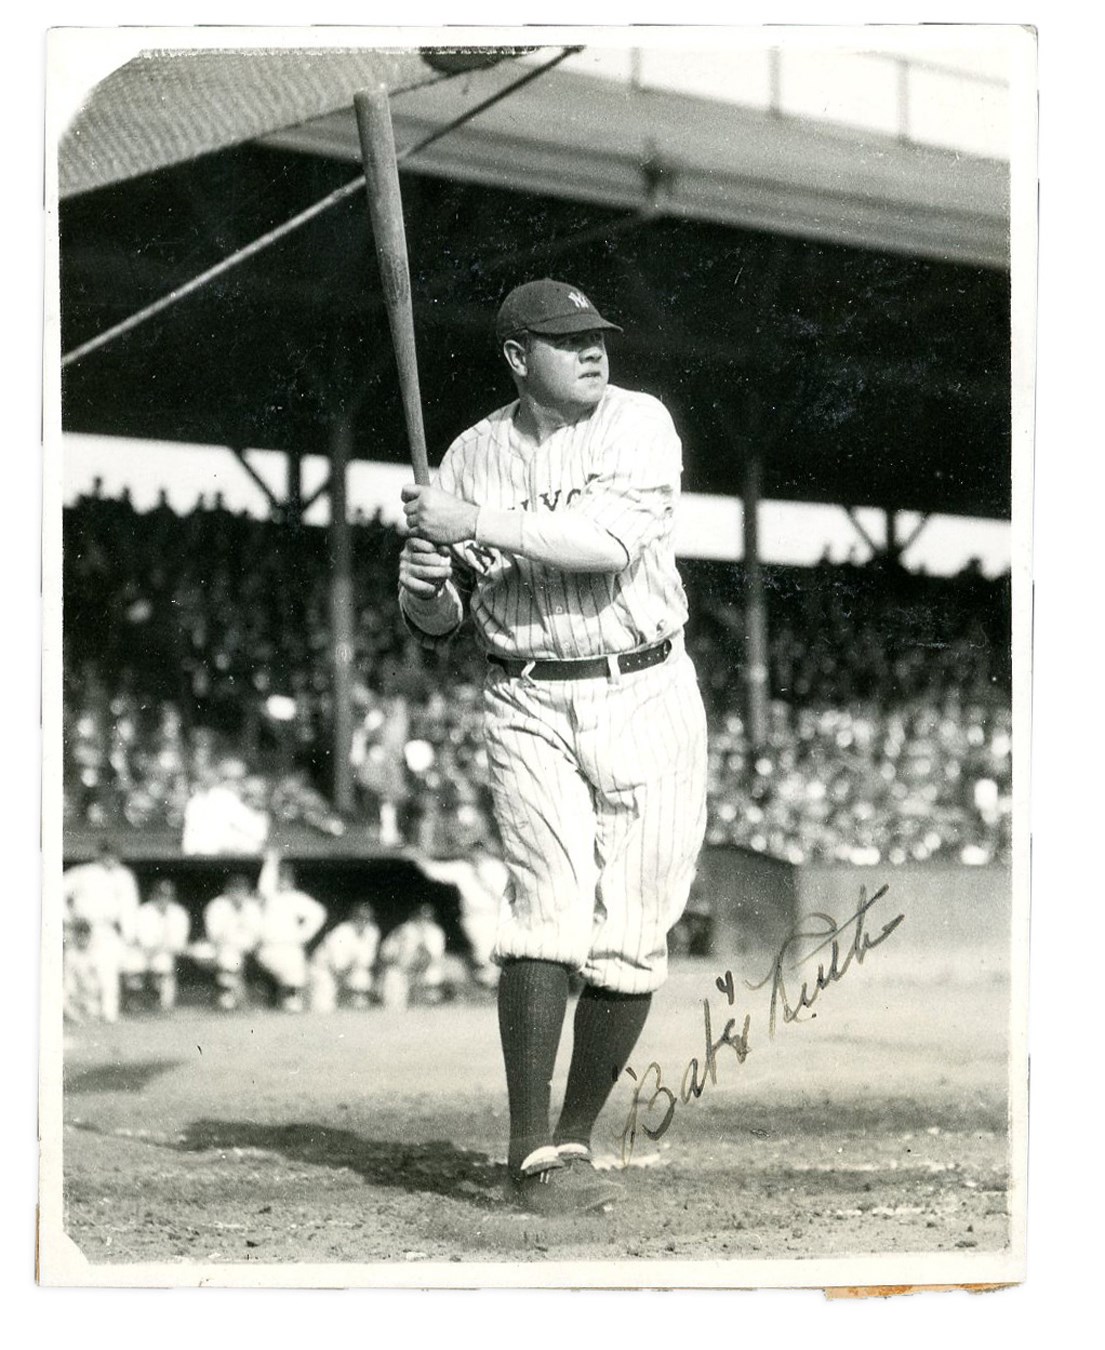 - Early & Exceptional Babe Ruth Signed Photograph Graded PSA/DNA "8" Autograph